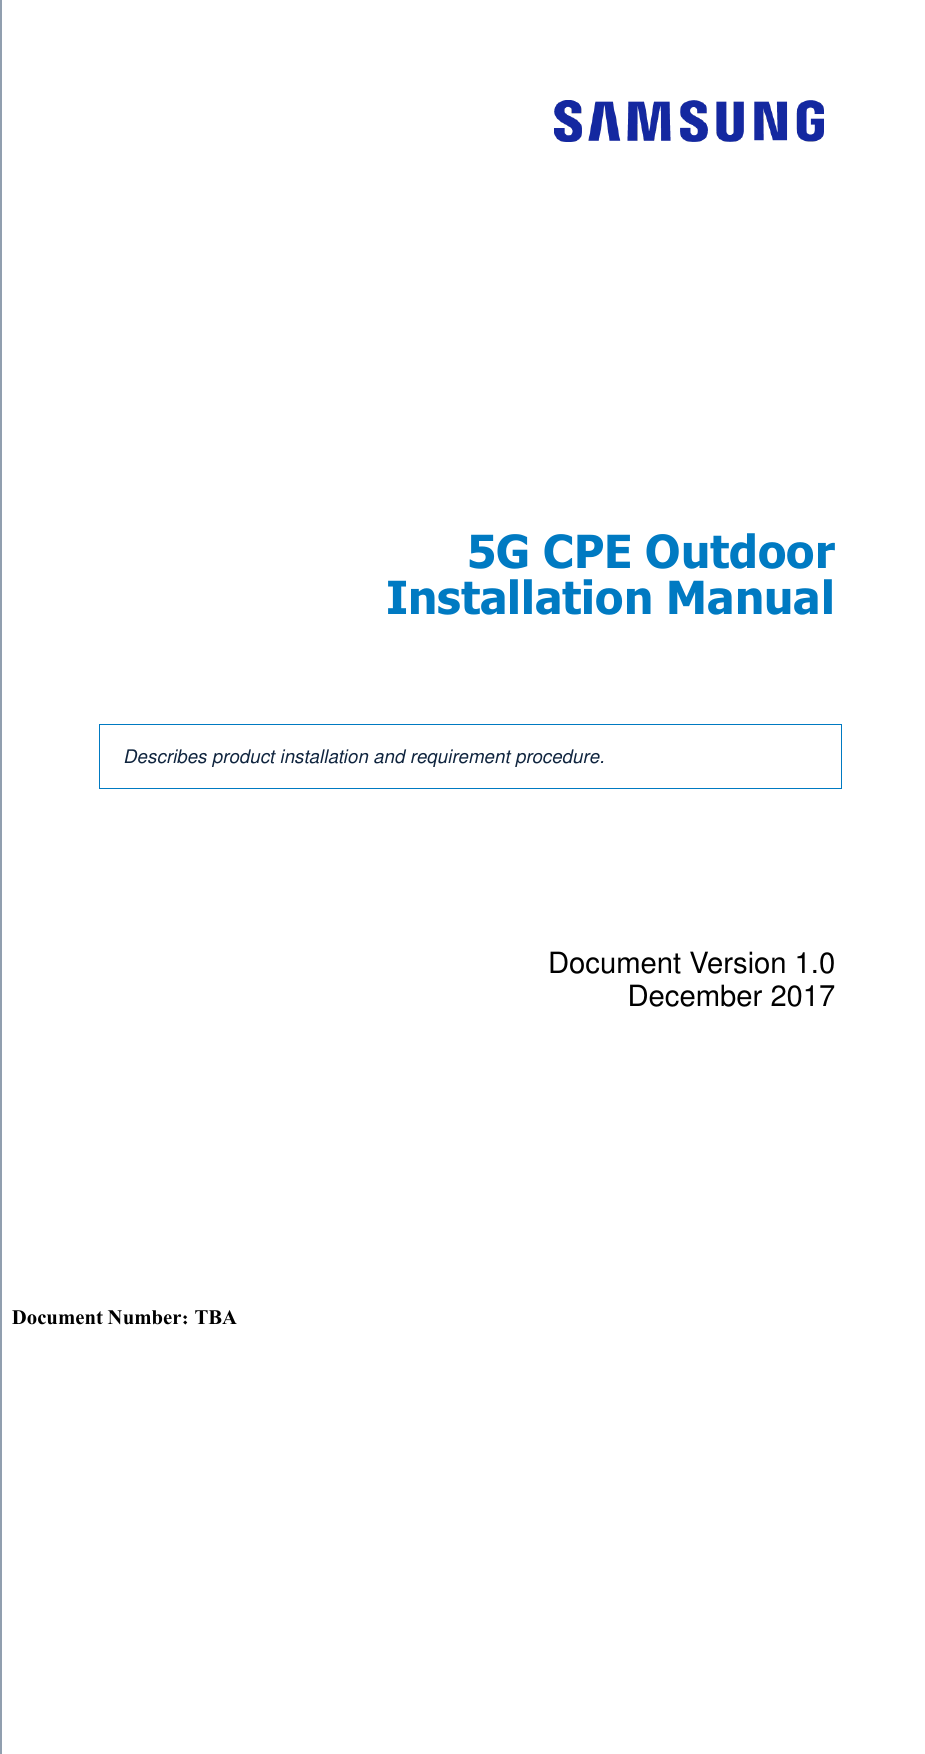     Radio Access Network  5G CPE Outdoor Installation Manual   Describes product installation and requirement procedure. Document Version 1.0 December 2017      Document Number: TBA 